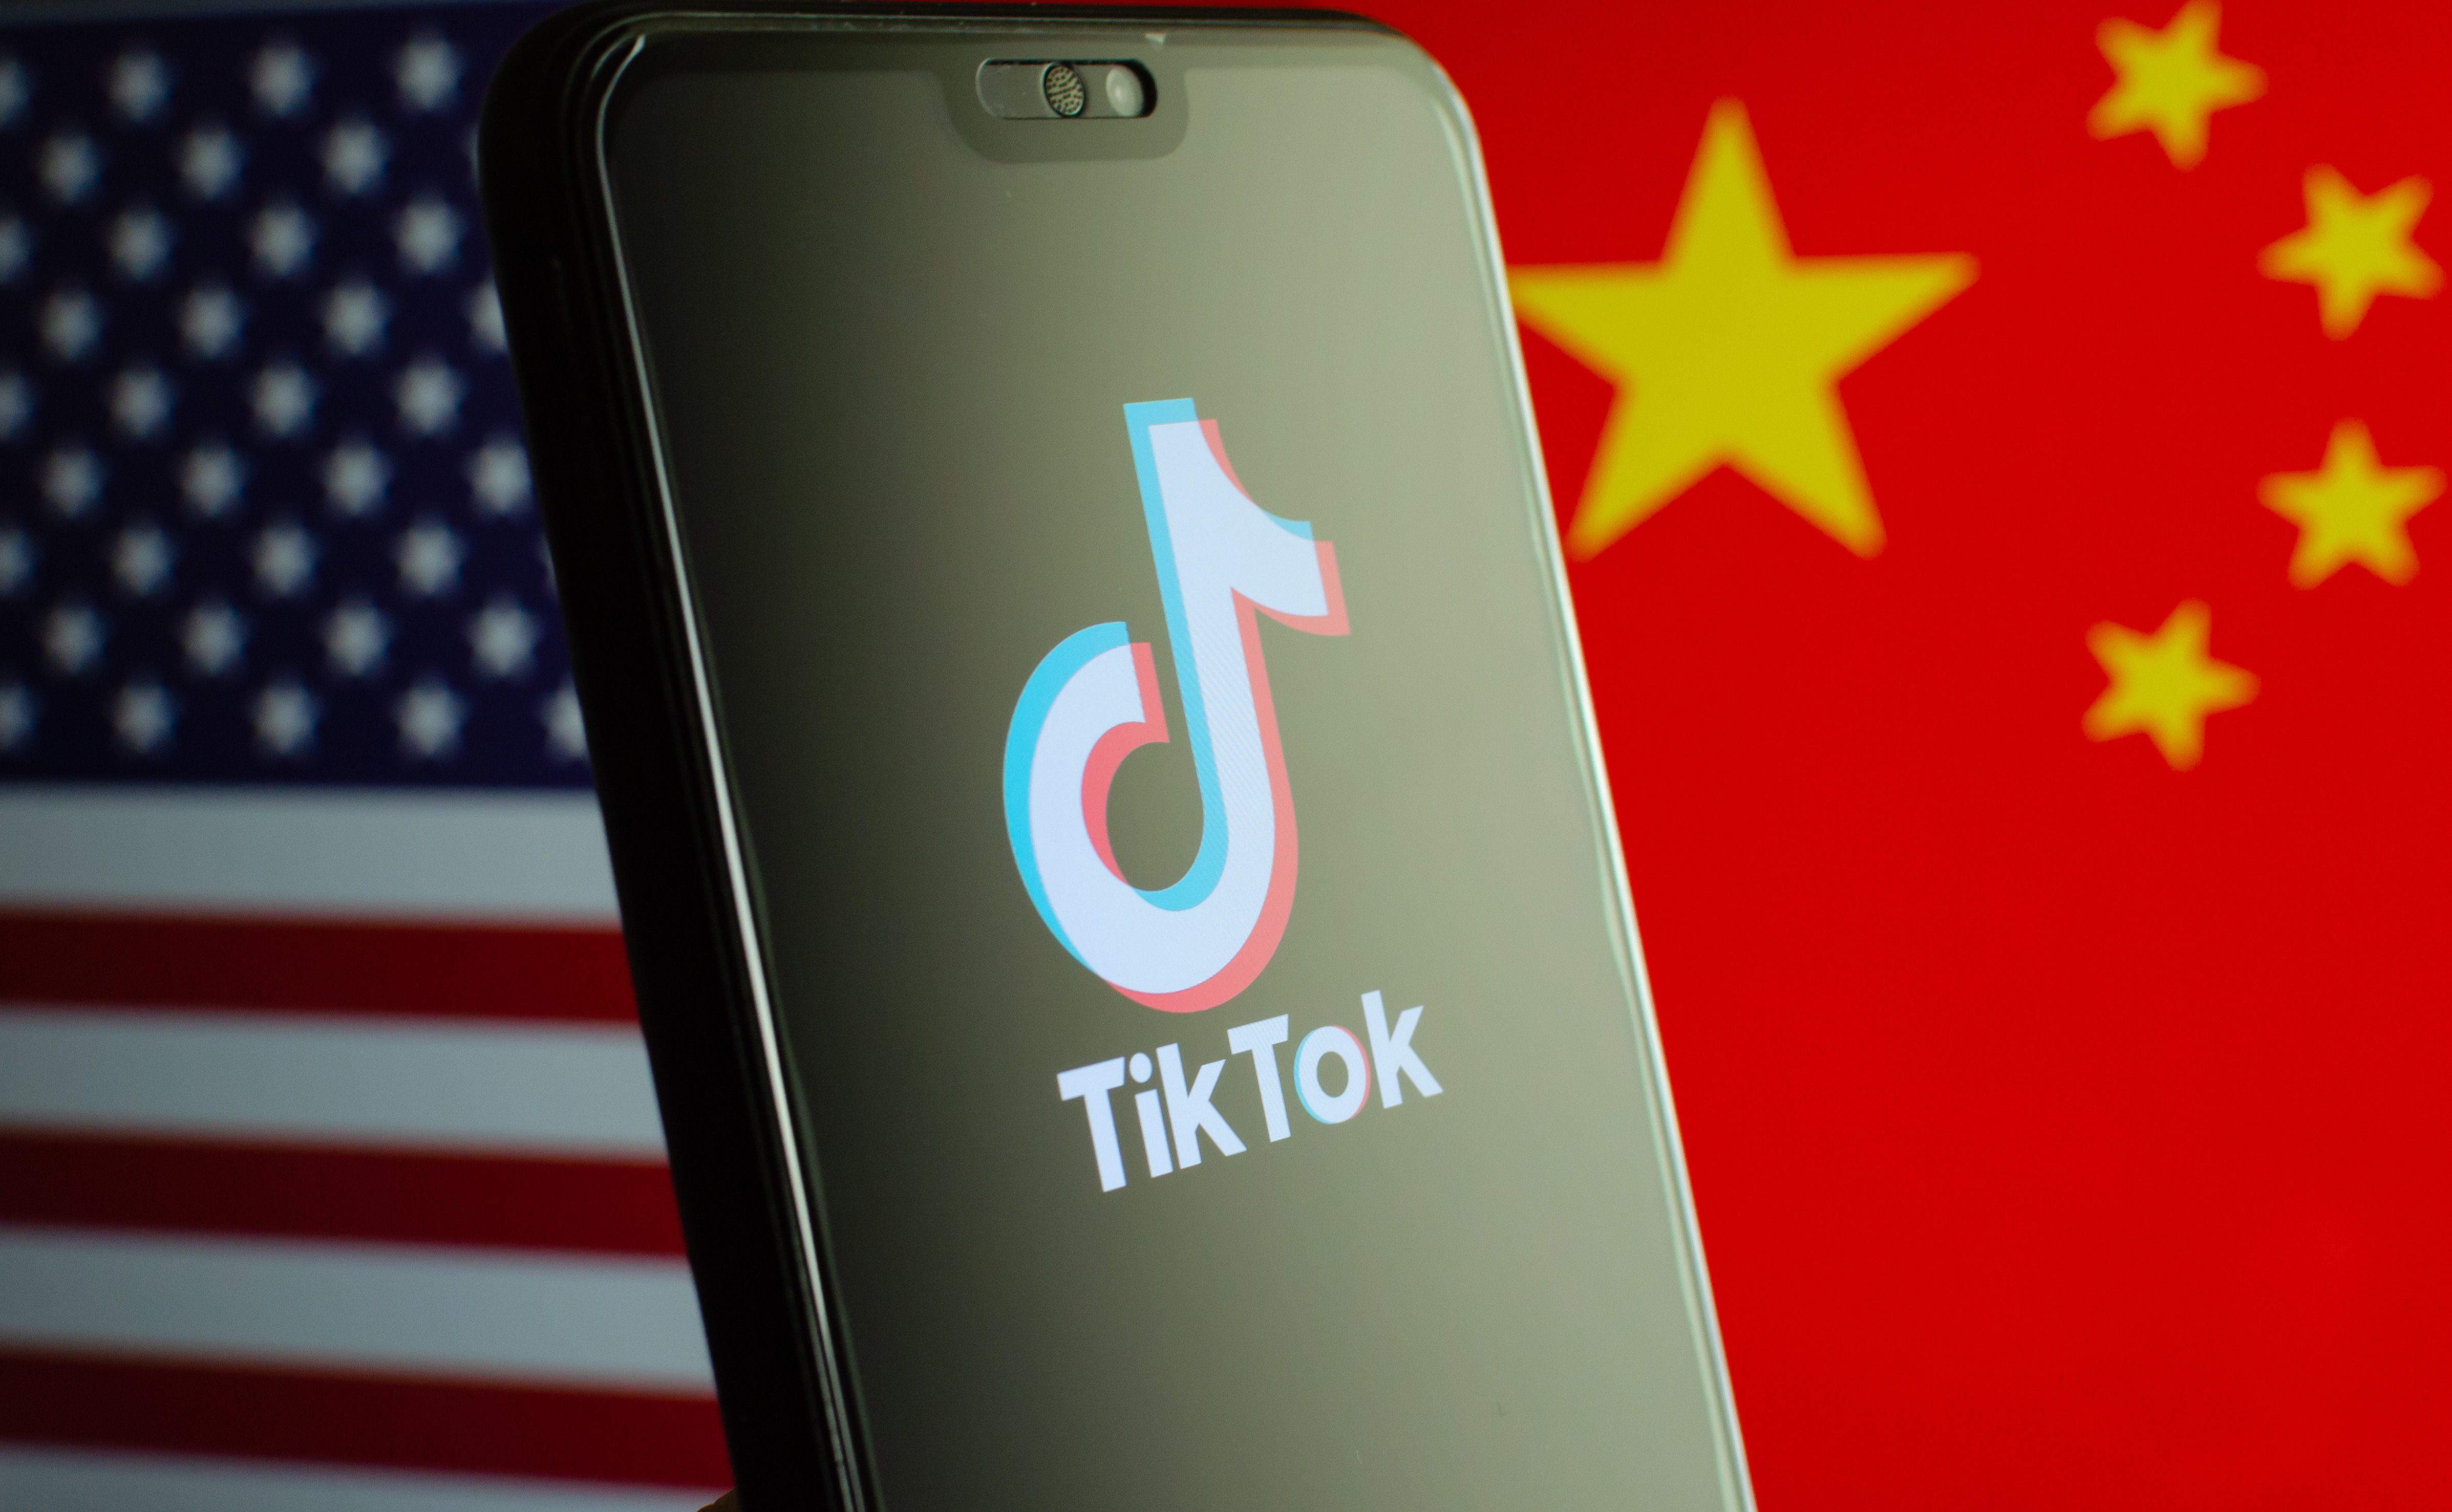 TikTok is seen by some as the latest front in the US-China tech war. Photo: Shutterstock